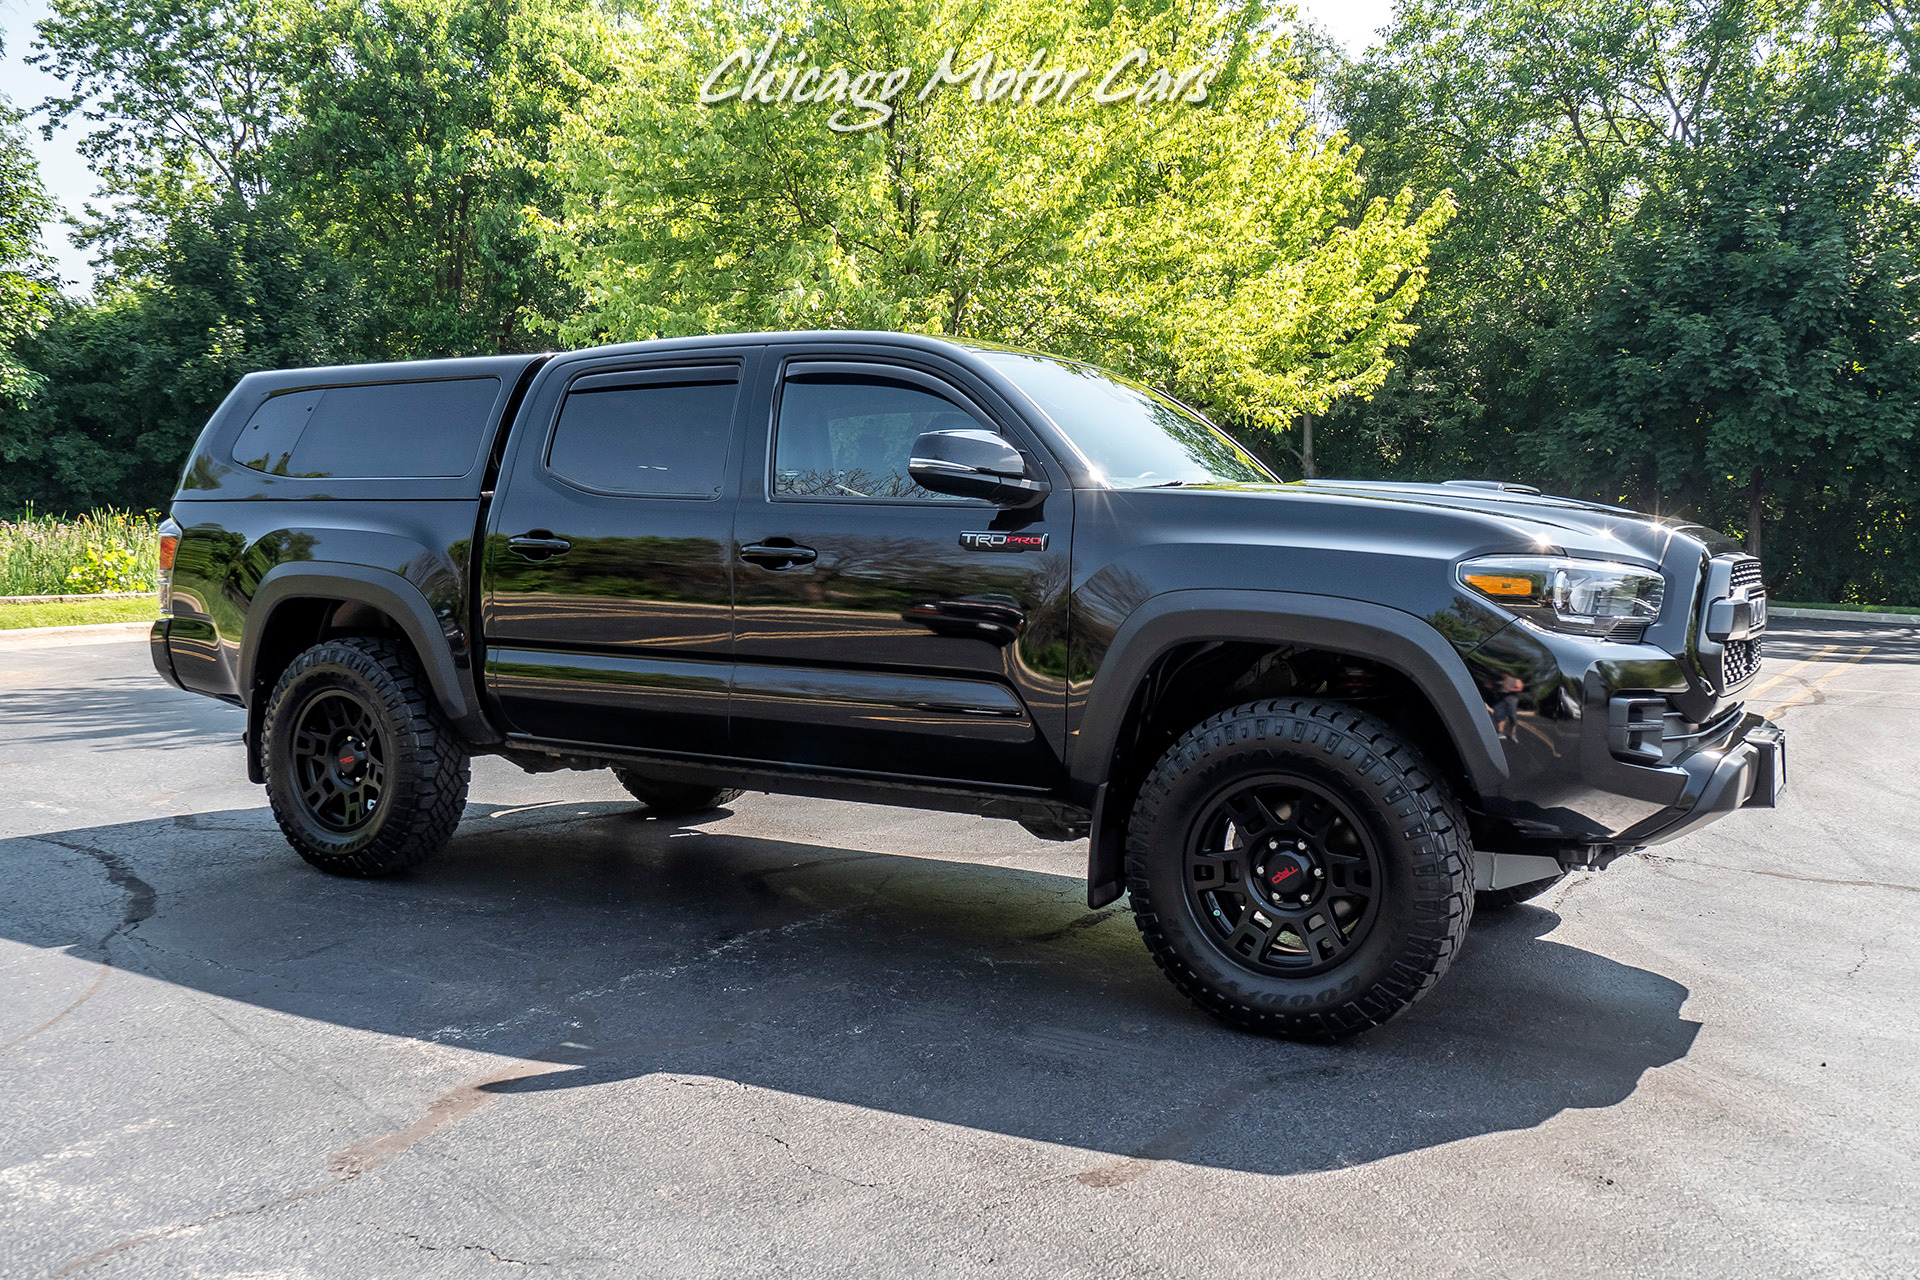 Used-2018-Toyota-Tacoma-TRD-Pro-Pickup-Truck-with-BED-CAP